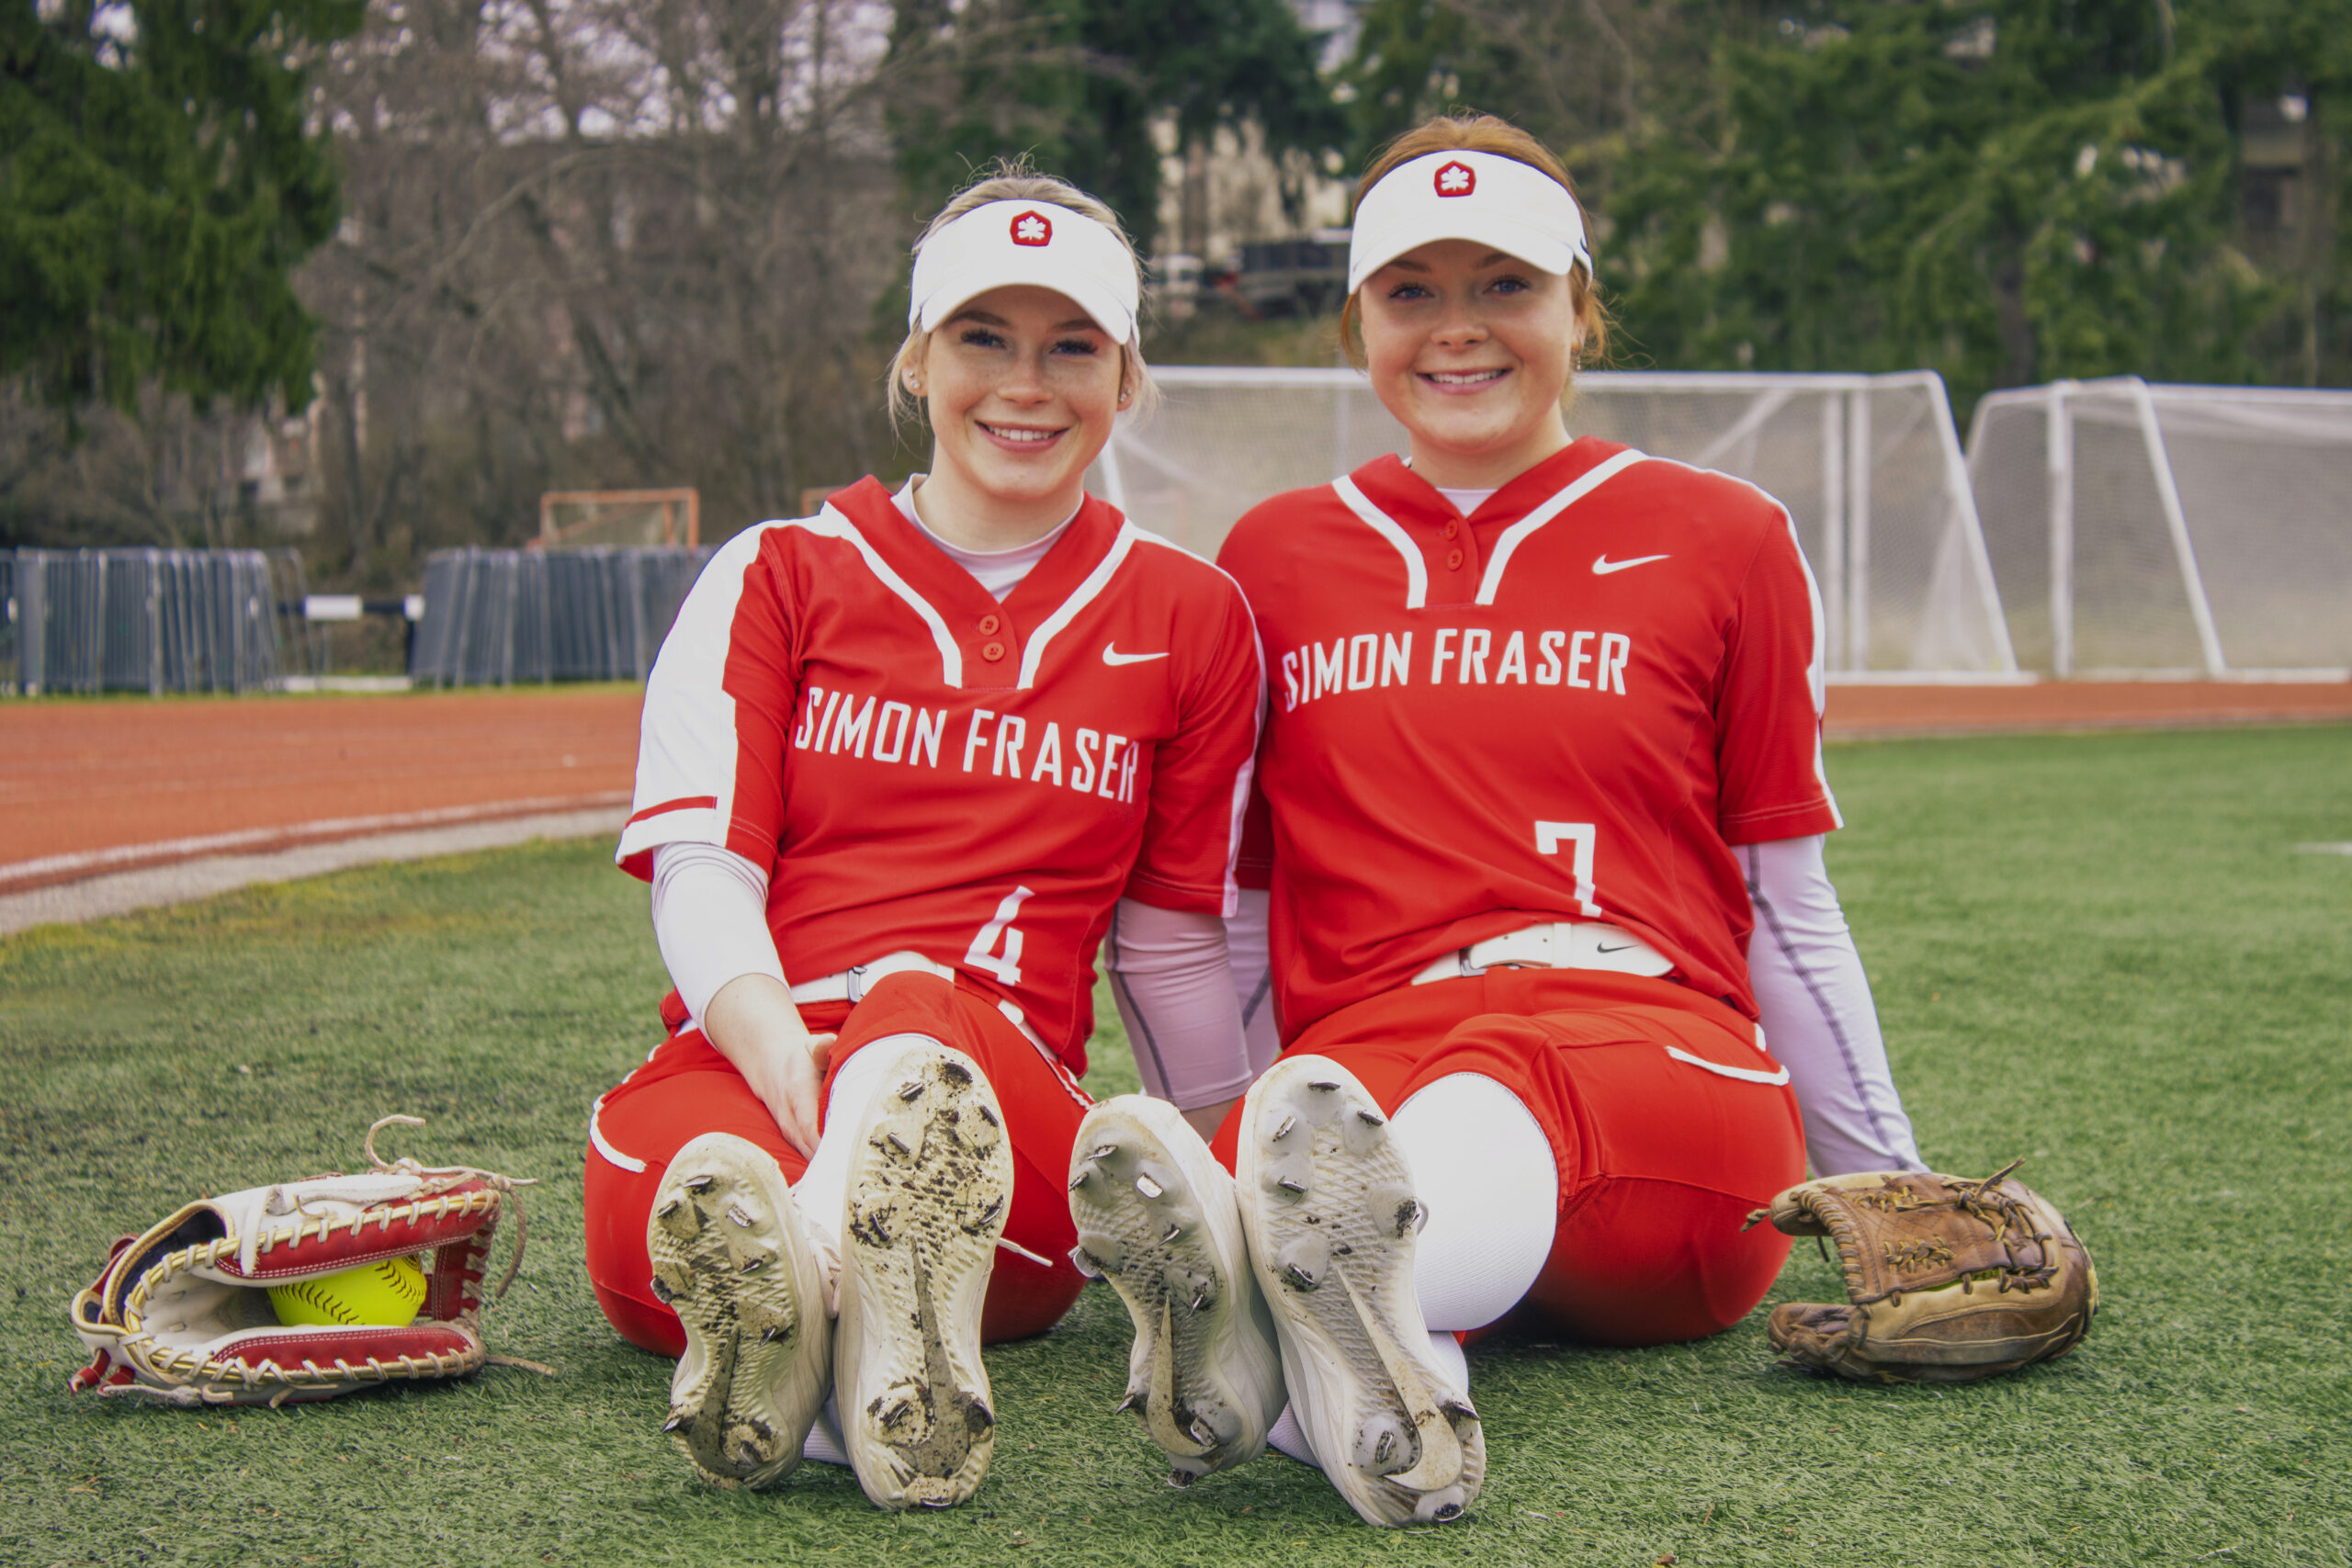 Georgia Ogg and Alex Ogg, two sisters on the SFU softball team, sit side by side with their legs out on the field, and a glove on either side of them.